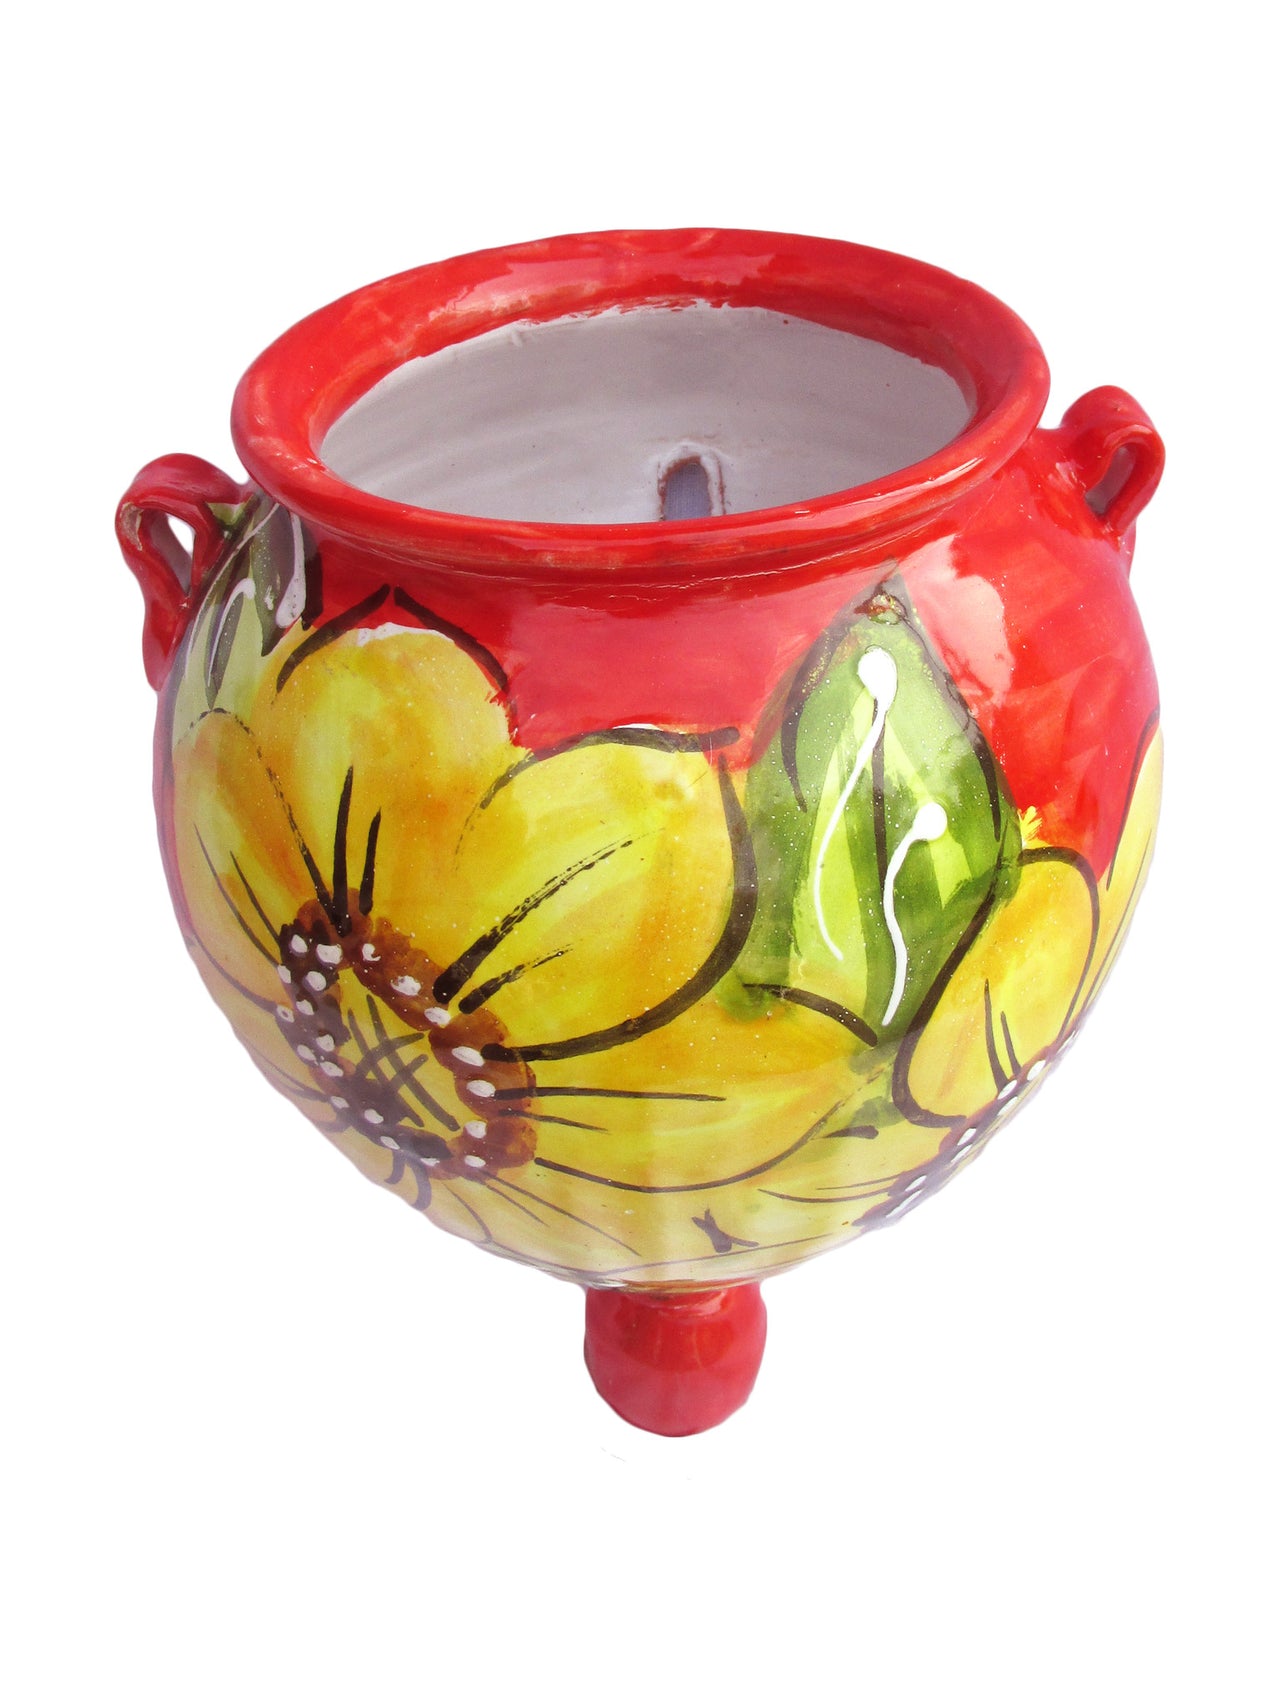 Wall Planter - Spanish Orza (Sunflower) - Hand Painted in Spain